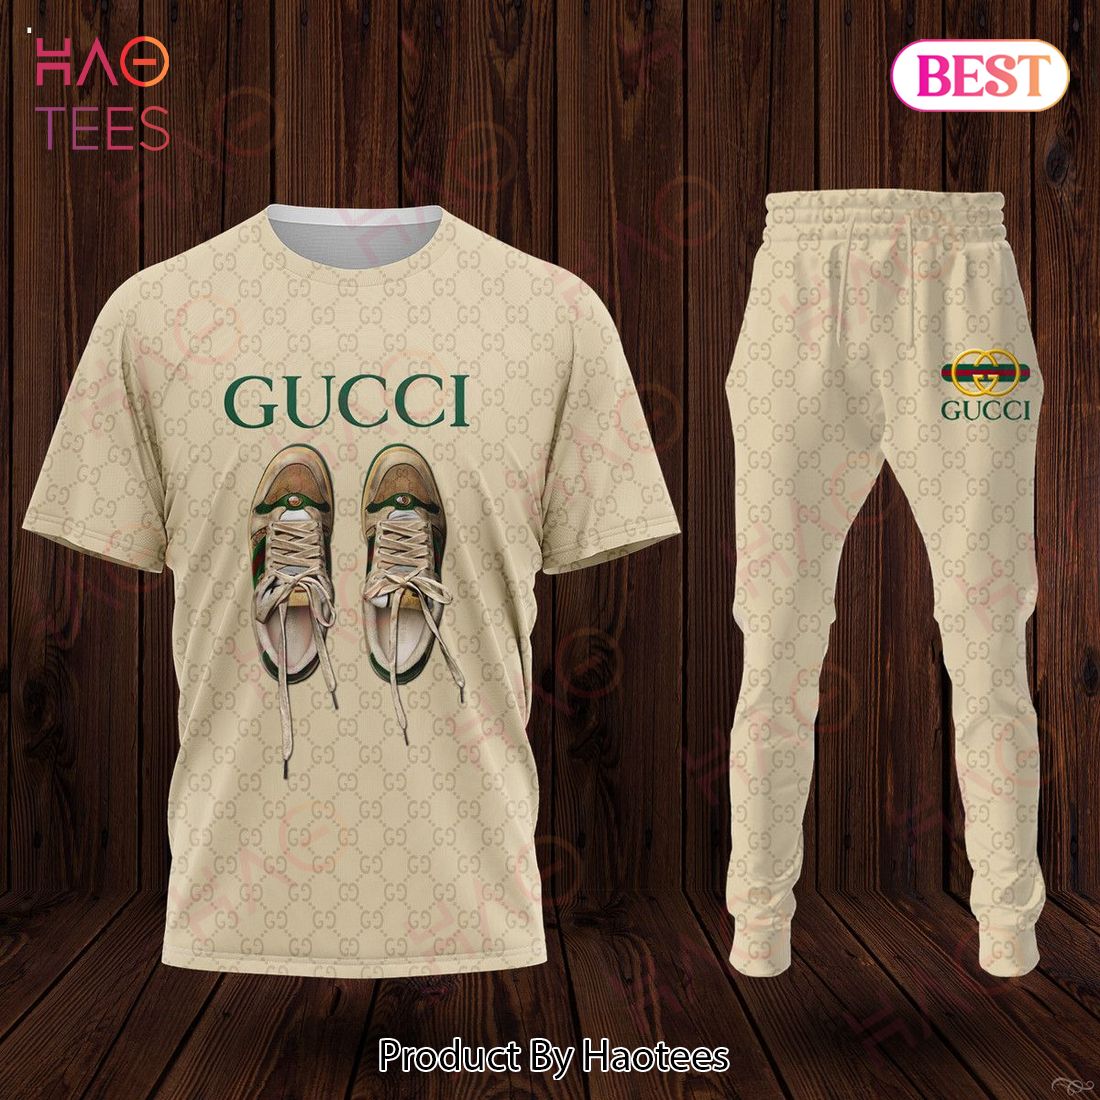 Gucci Beige Colored Luxury Brand T-Shirt And Pants Limited Edition